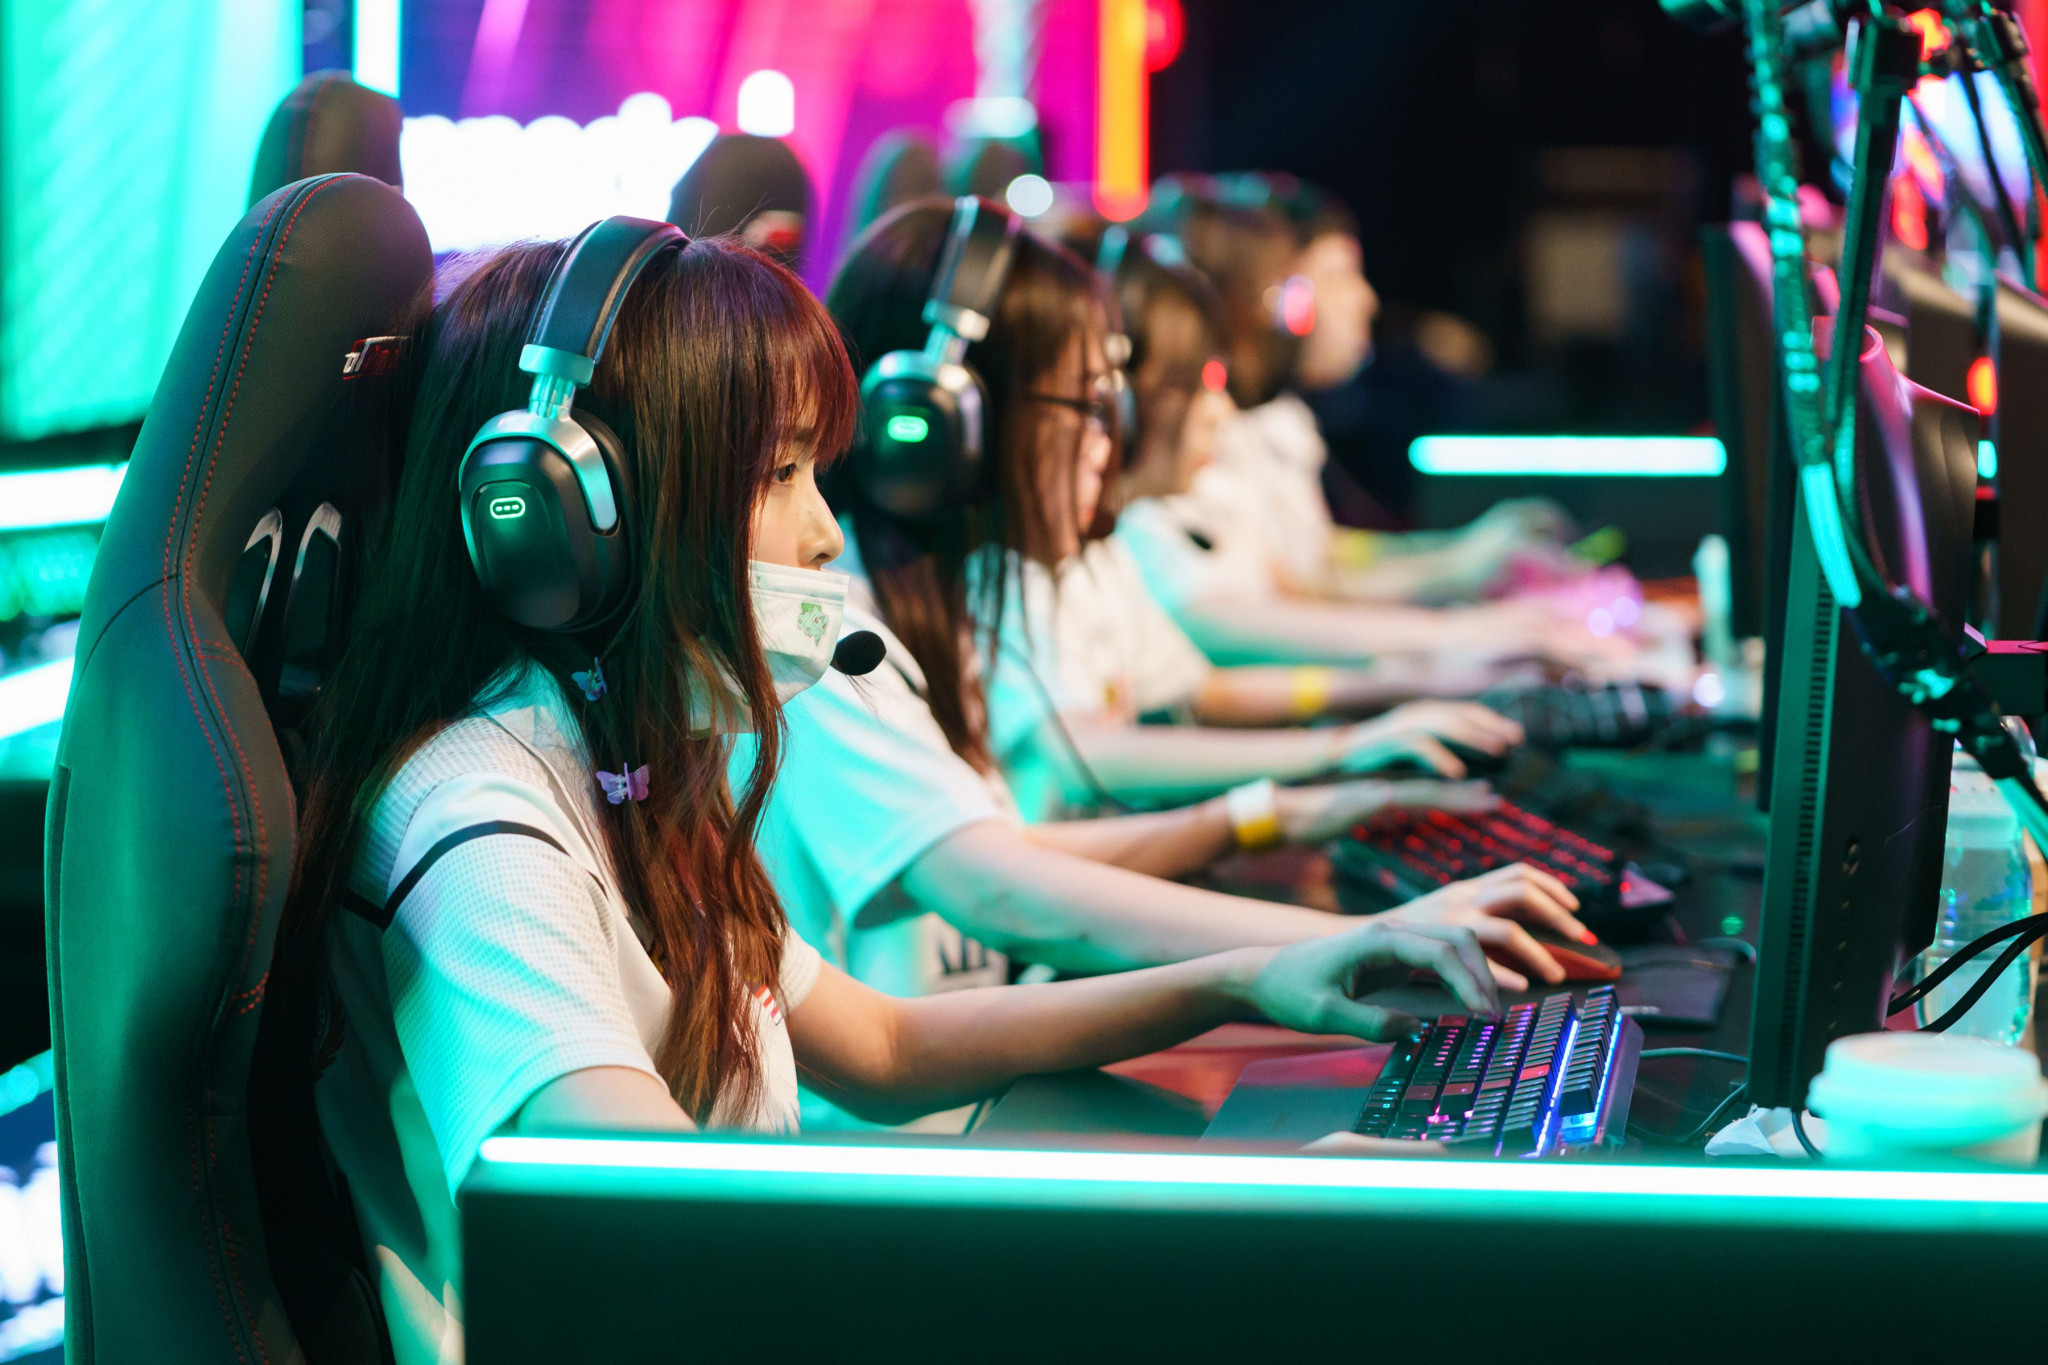 Malaysia concentrated intently during the DOTA 2 women's Grand Final, where they won gold ©GEF